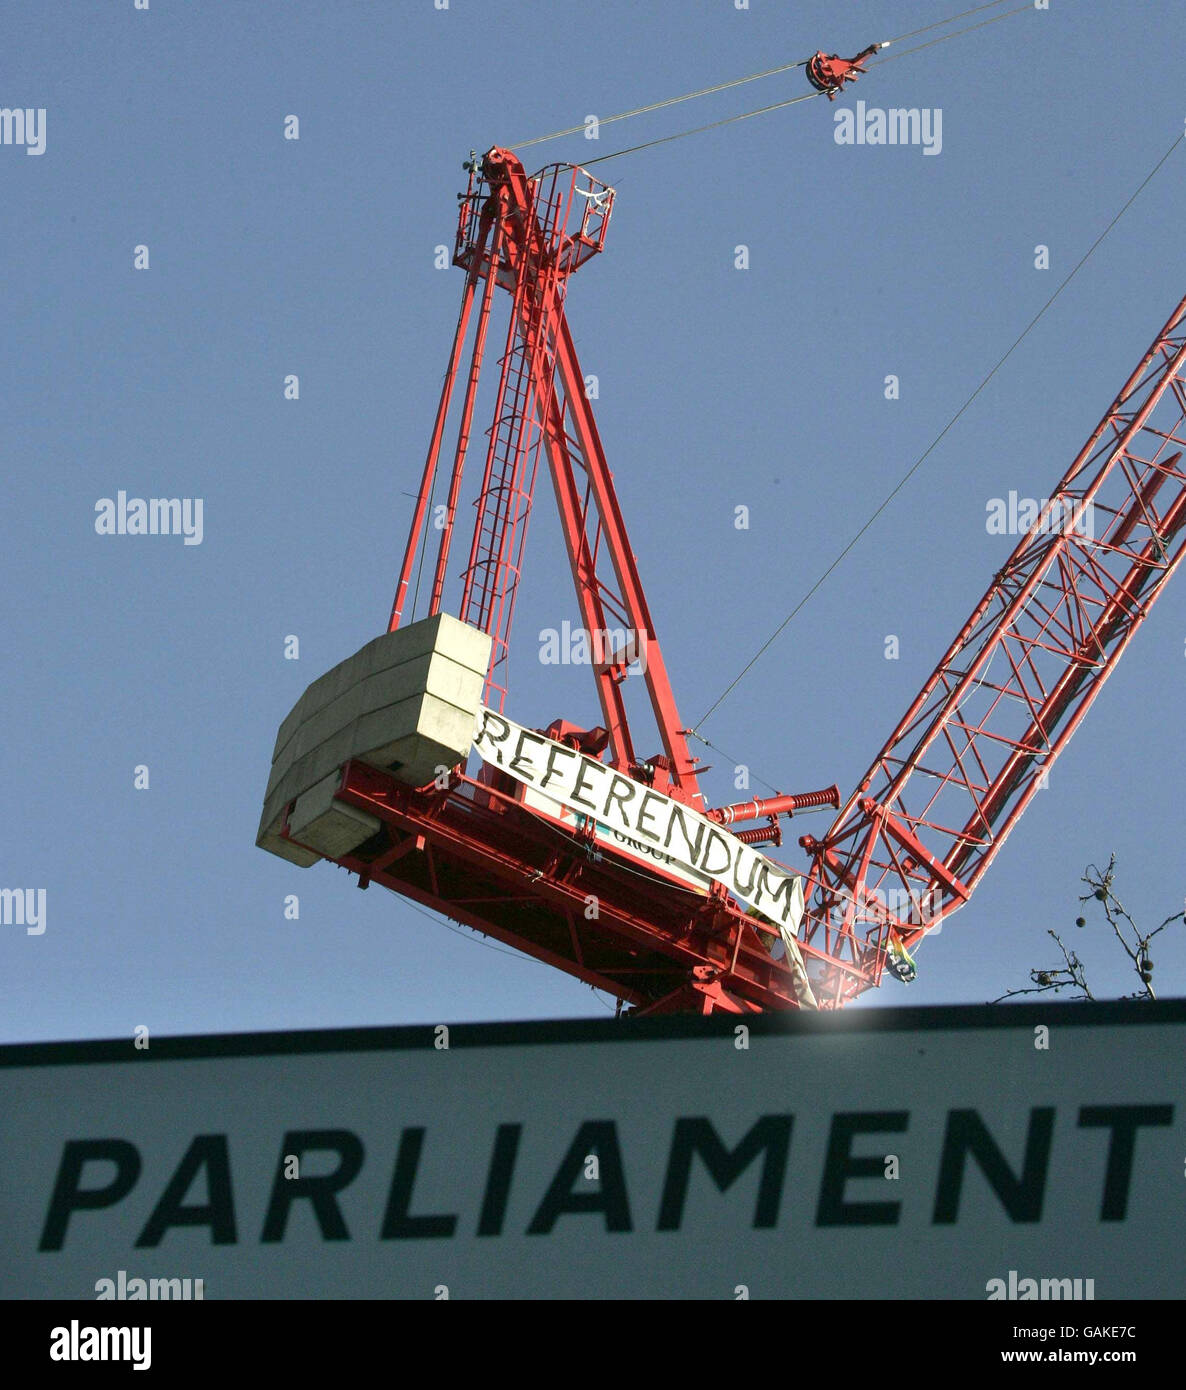 A banner unfurled by demonstrators on top of a crane in Parliament Square, London, in an apparent protest over the EU Treaty. Stock Photo